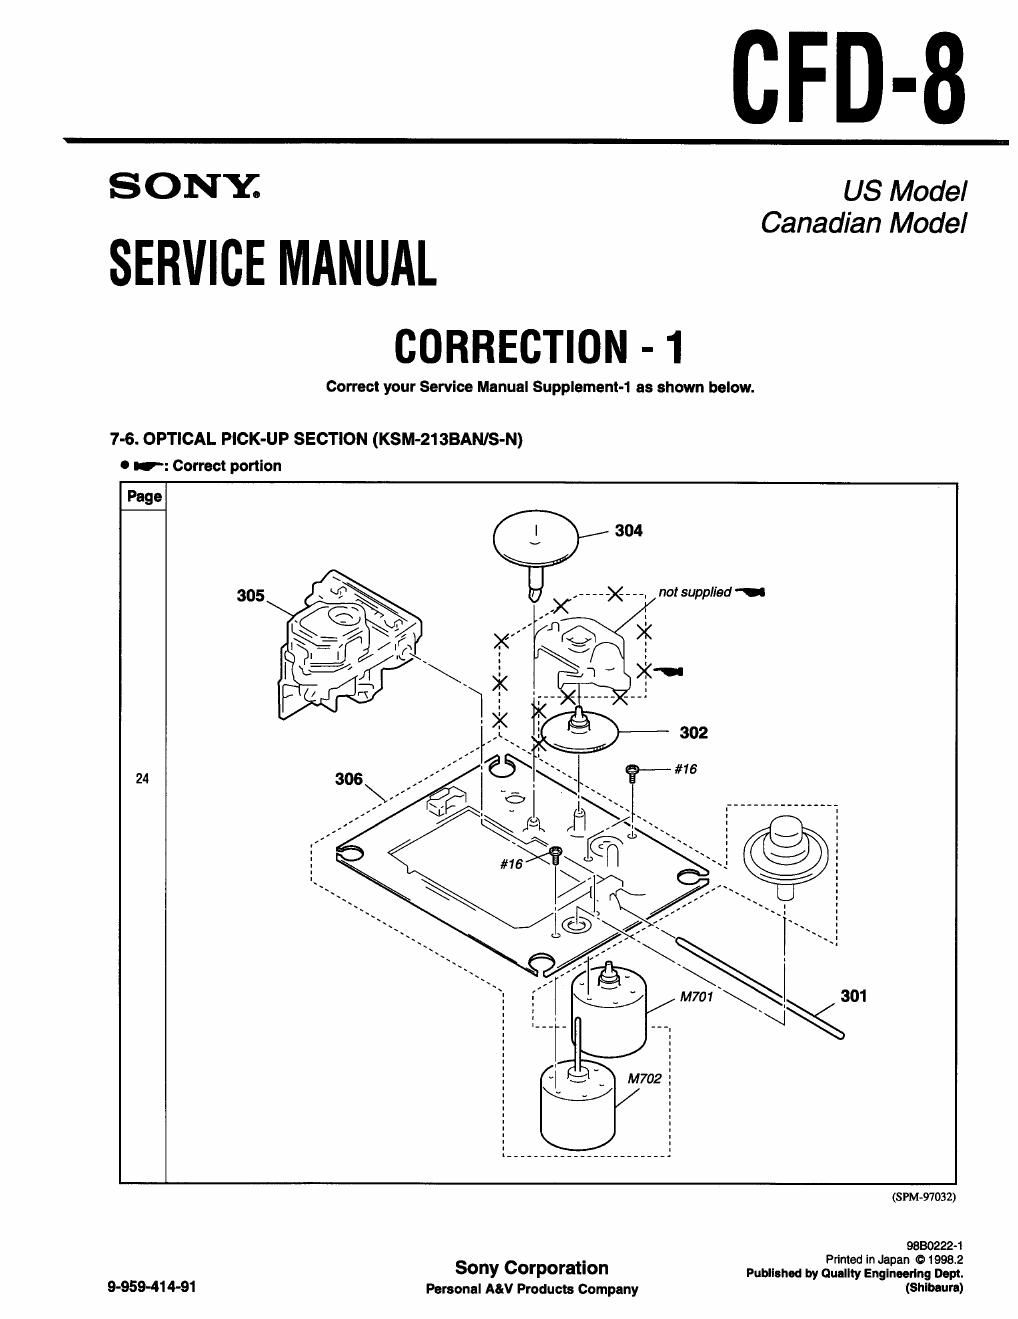 sony cfd 8 service manual